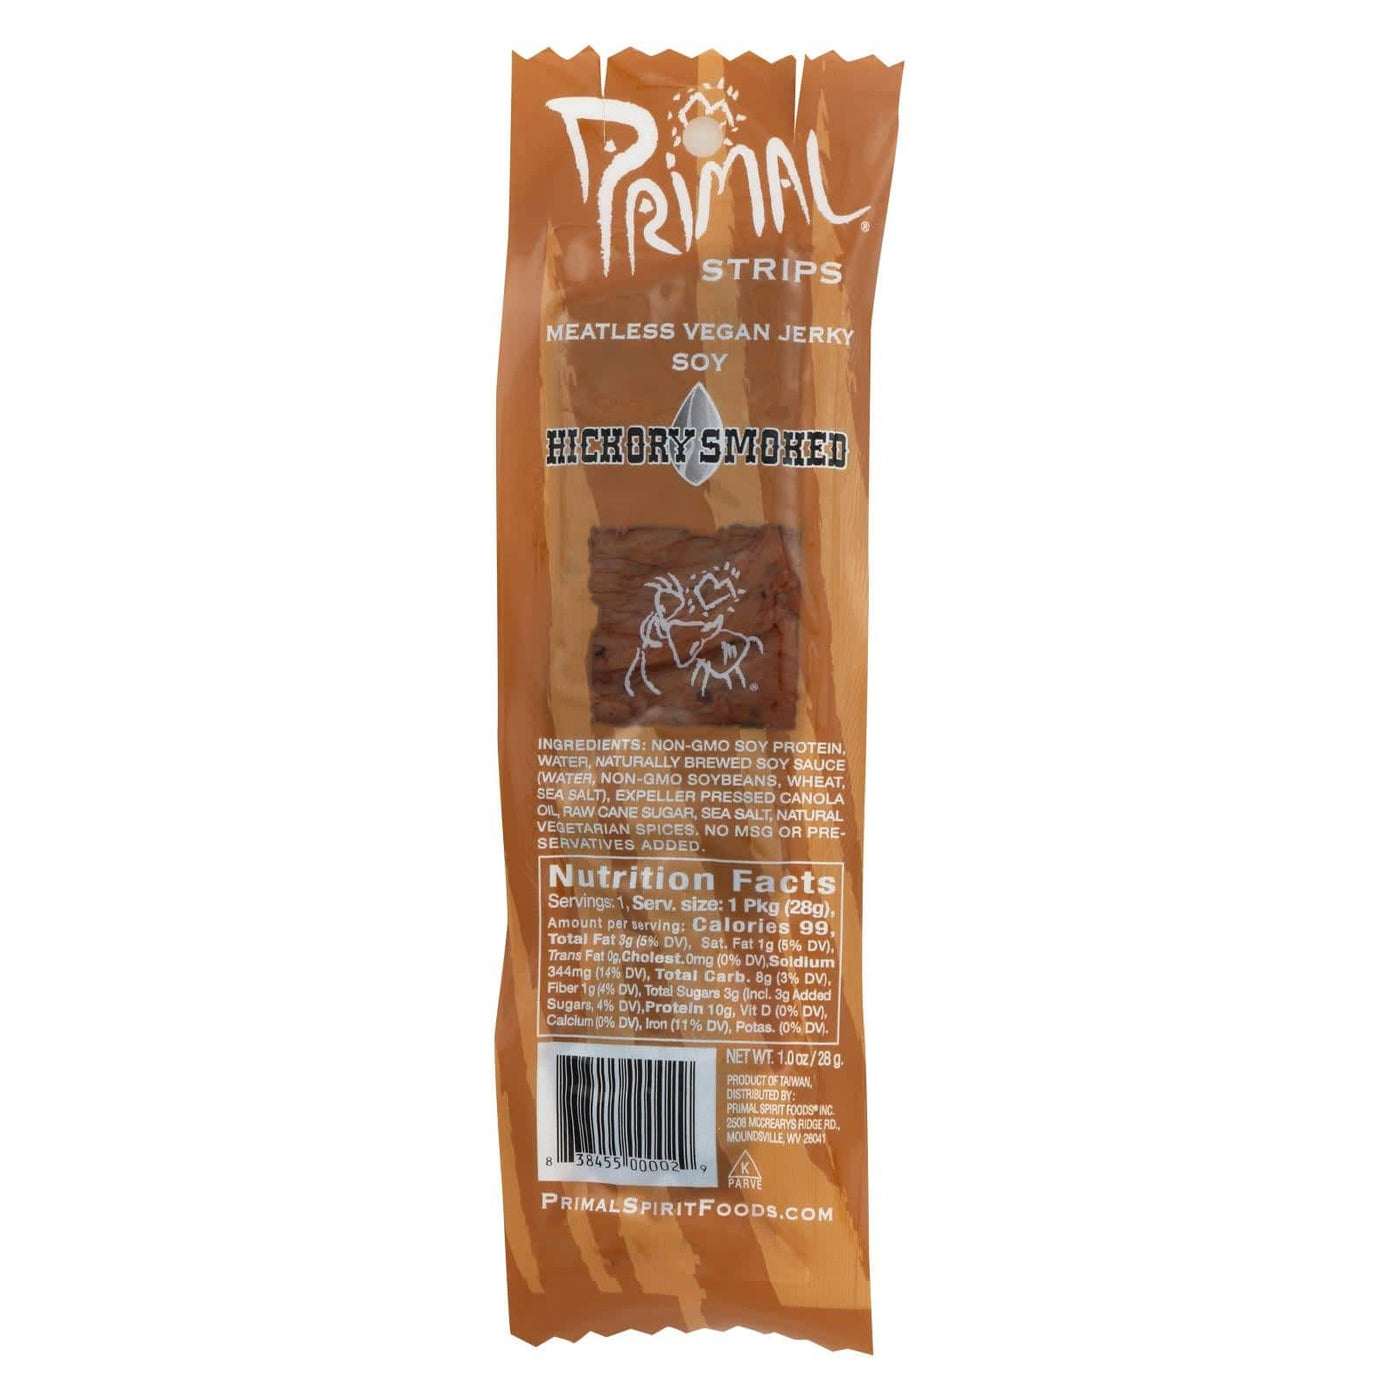 Buy Primal Strips Vegan Jerky - Meatless - Soy - Hickory Smoked - 1 Oz - Case Of 24  at OnlyNaturals.us